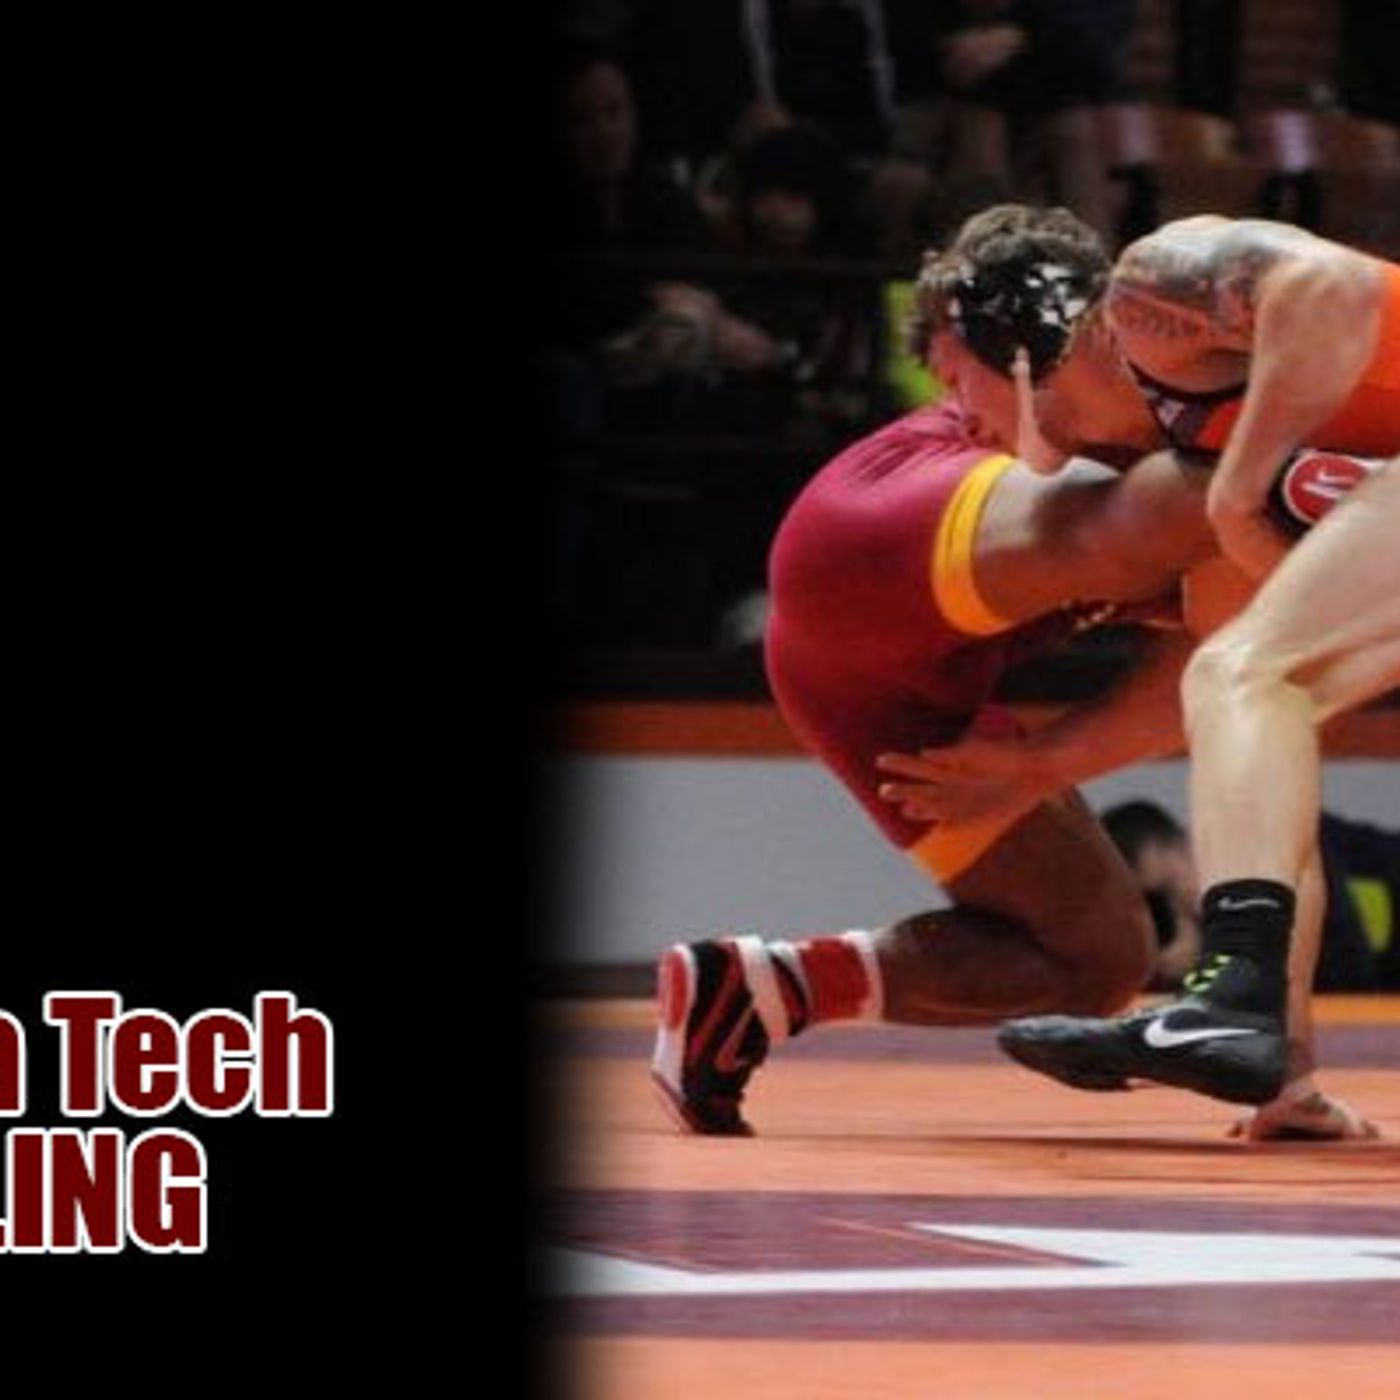 VT26: Zack Zavatsky making the transition from high school to college